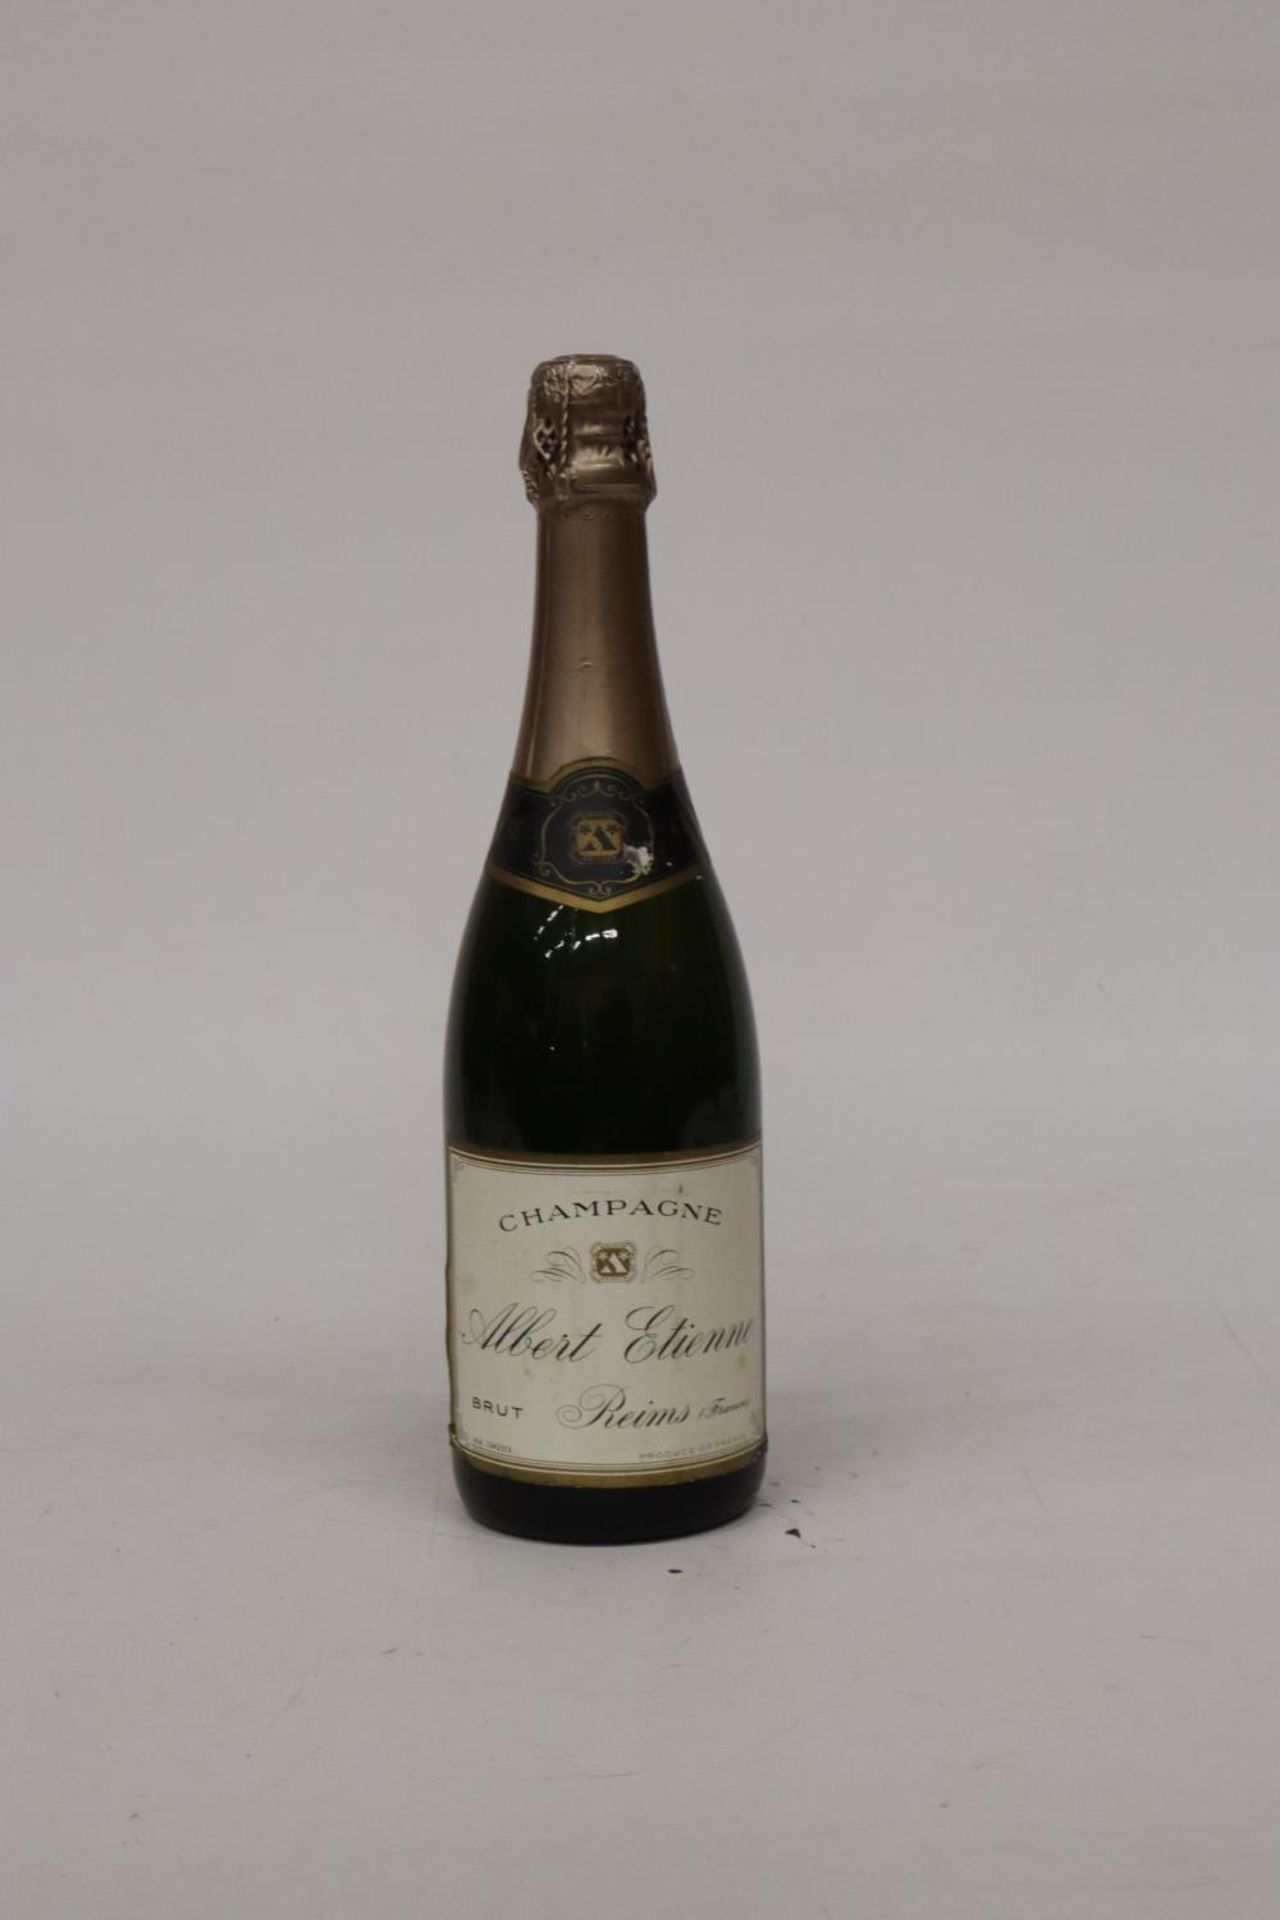 A BOTTLE OF ALBERT ETIENNE CHAMPAGNE - Image 2 of 3